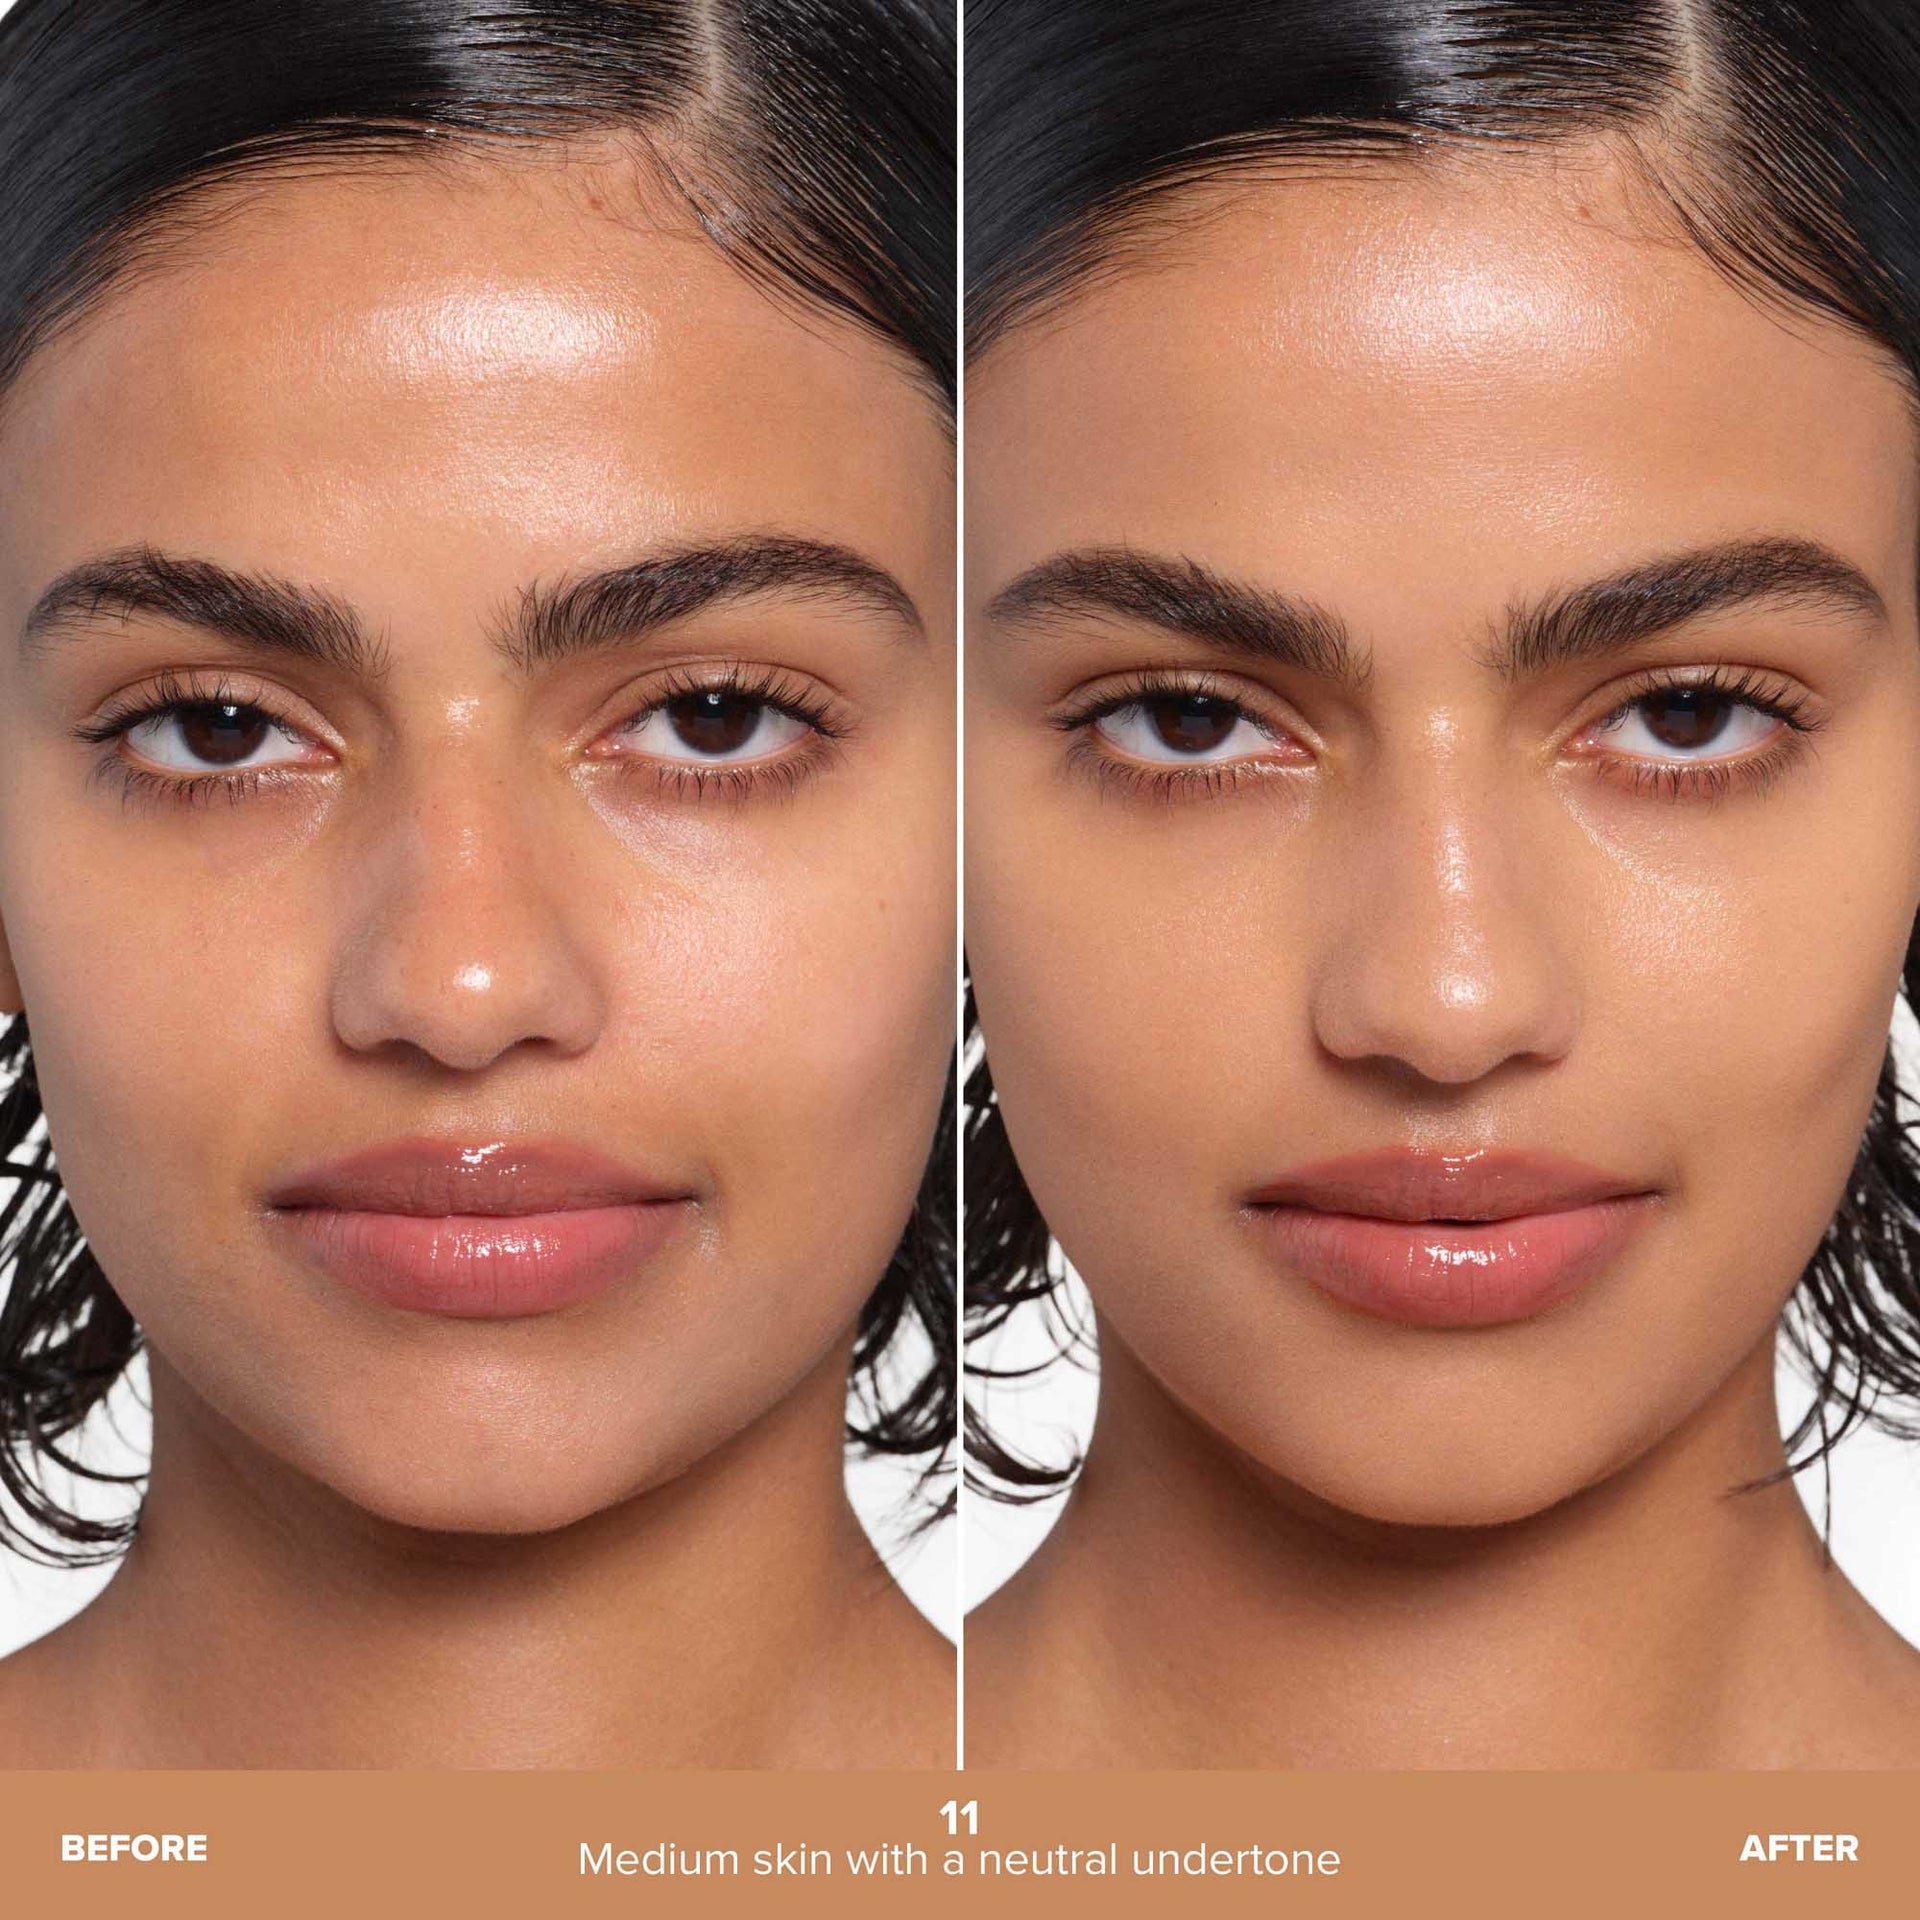 Shade 11 | Beauty Balm Serum Boosted Skin Tint Before & After - Shade 11